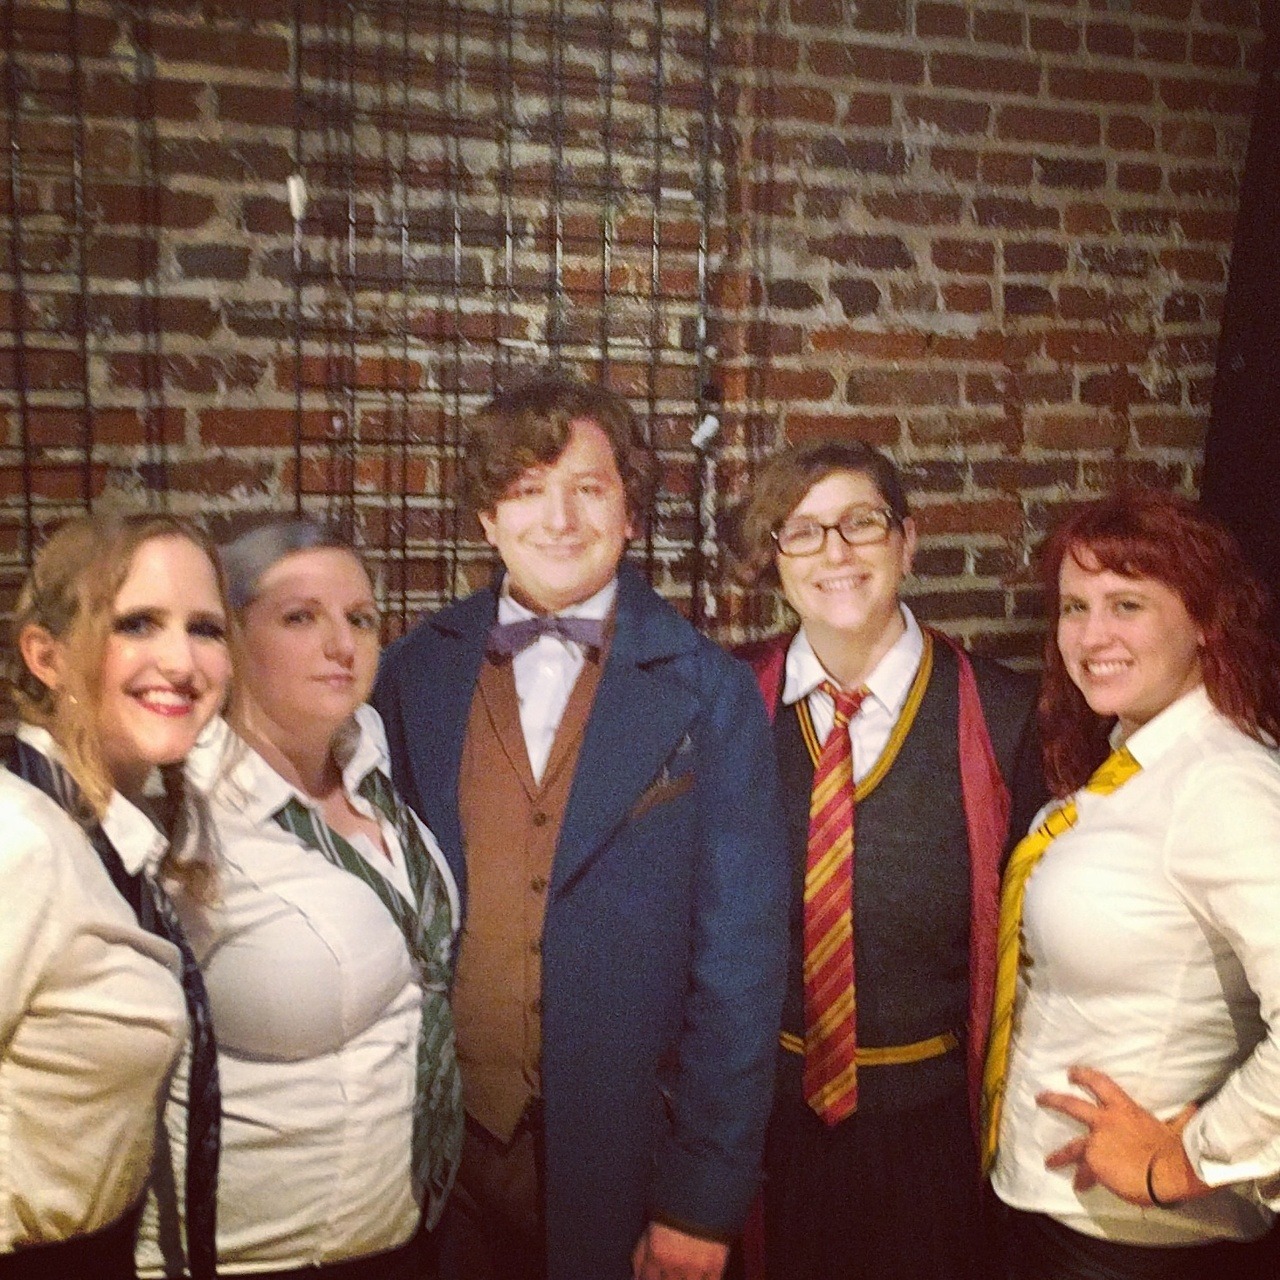 Misbehavin' Maidens and their Cabana Boy for the night, Newt Scamander